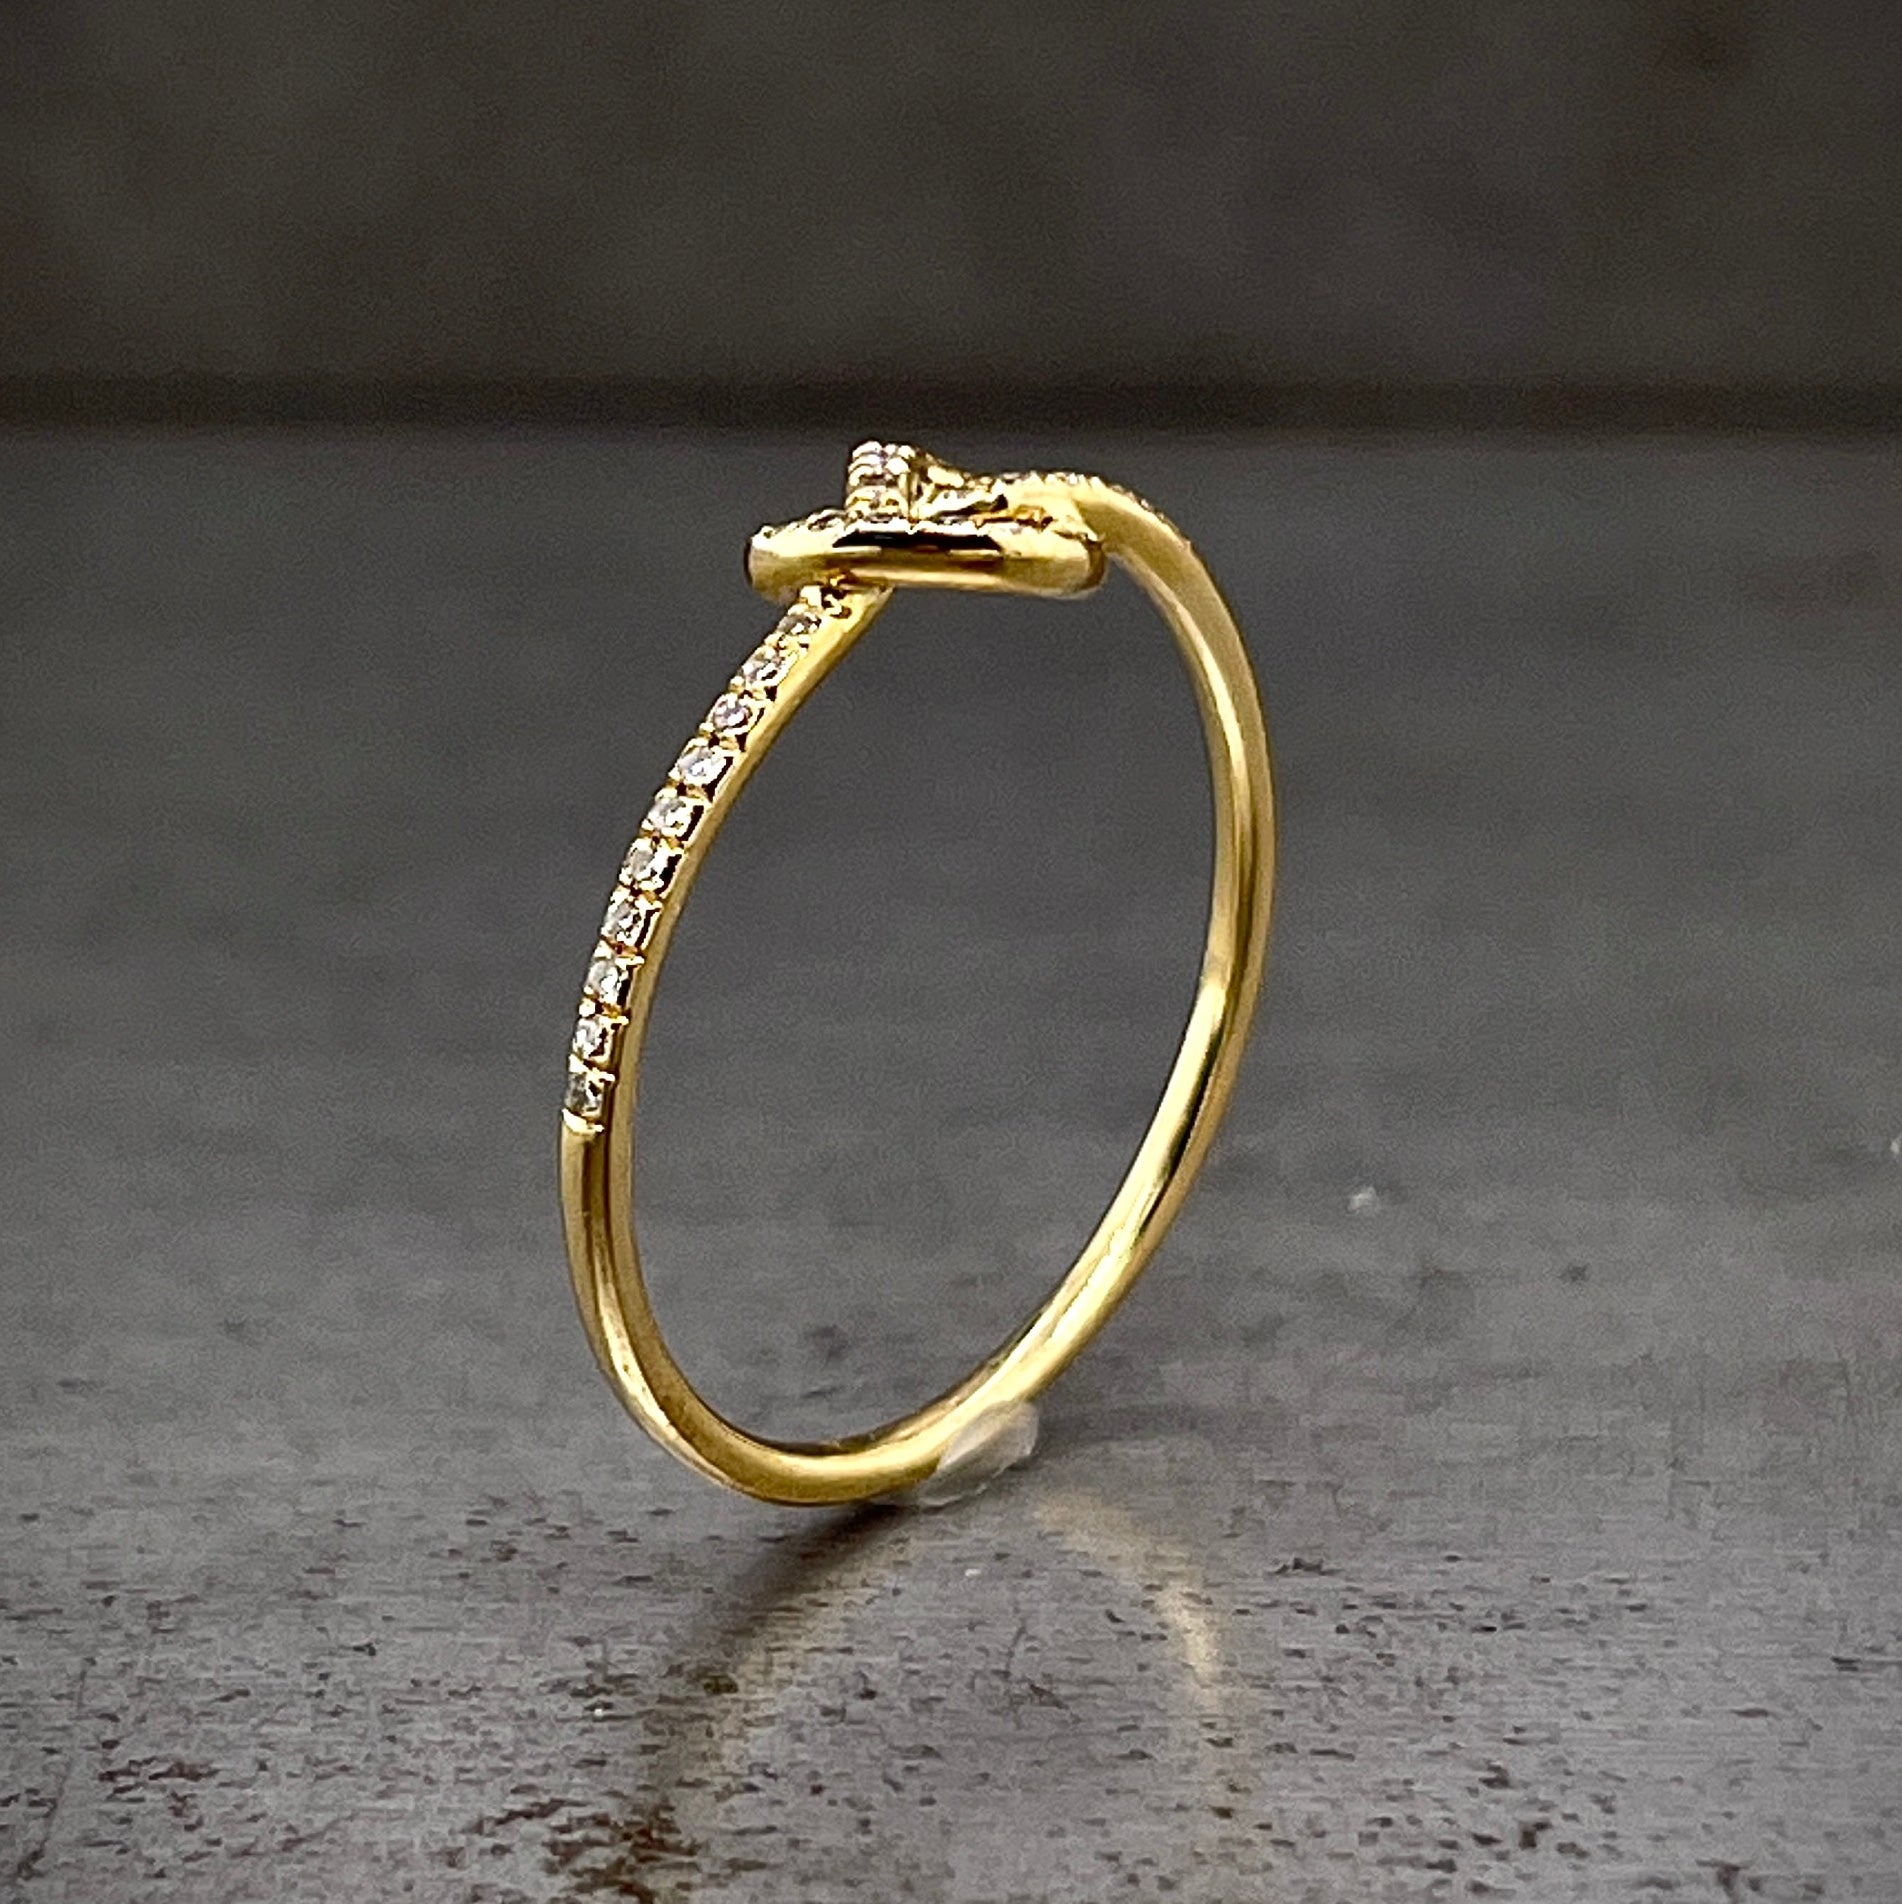 Angled side view of love me knot ring standing up.